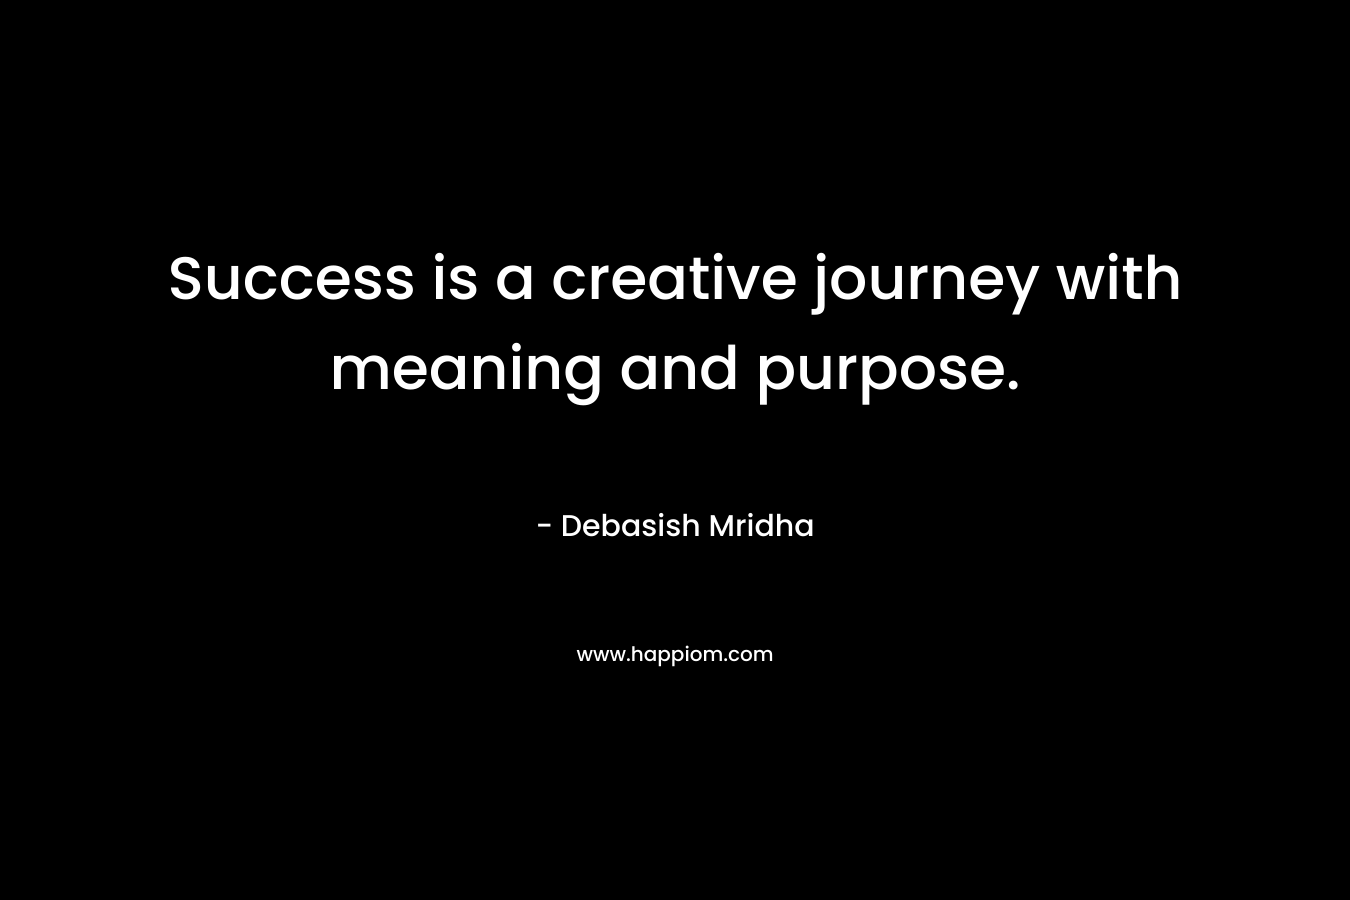 Success is a creative journey with meaning and purpose.